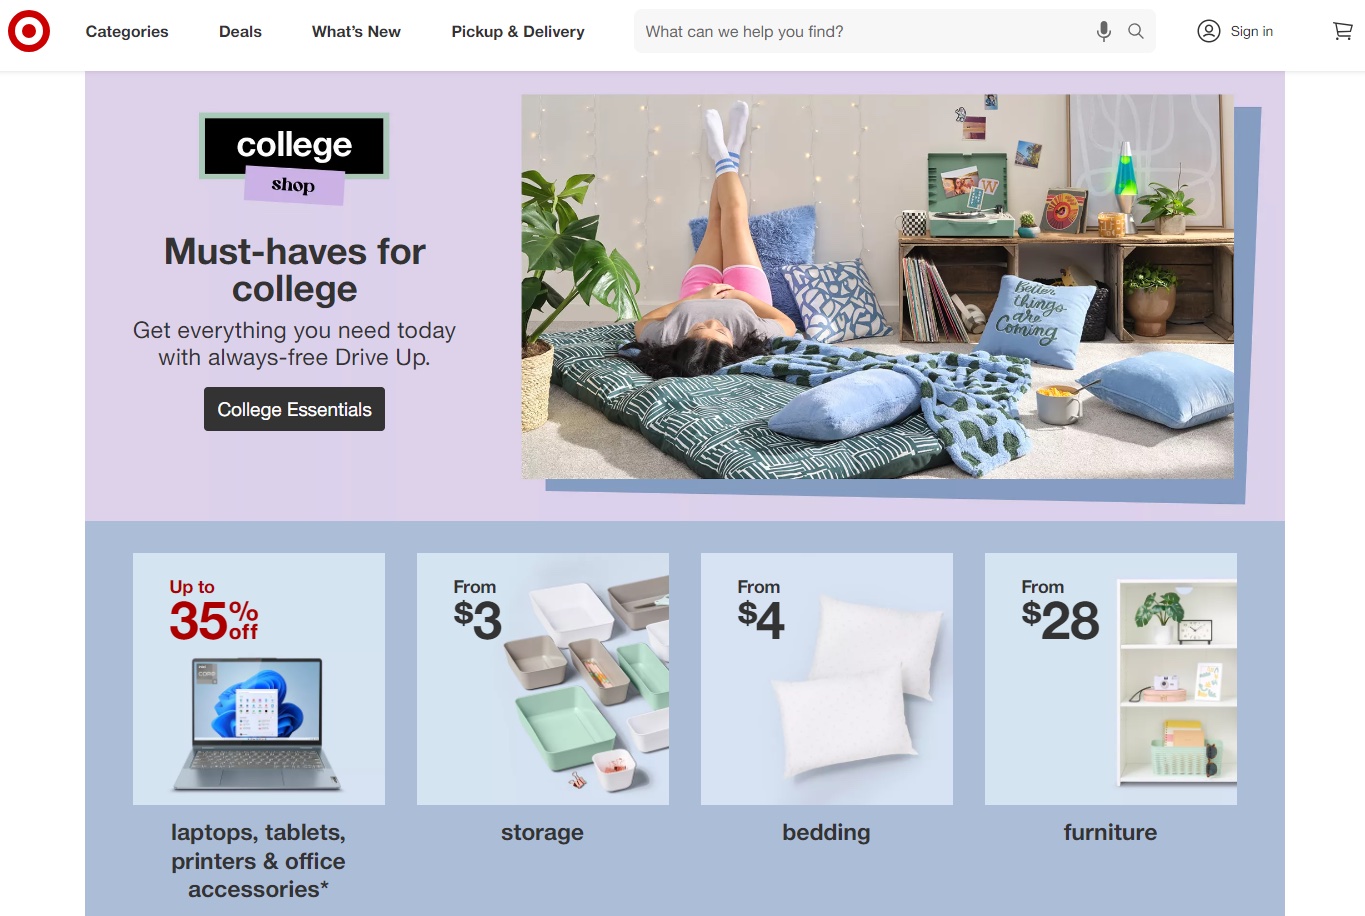 A homepage banner pointing users to "college shop" collection on an ecommerce website